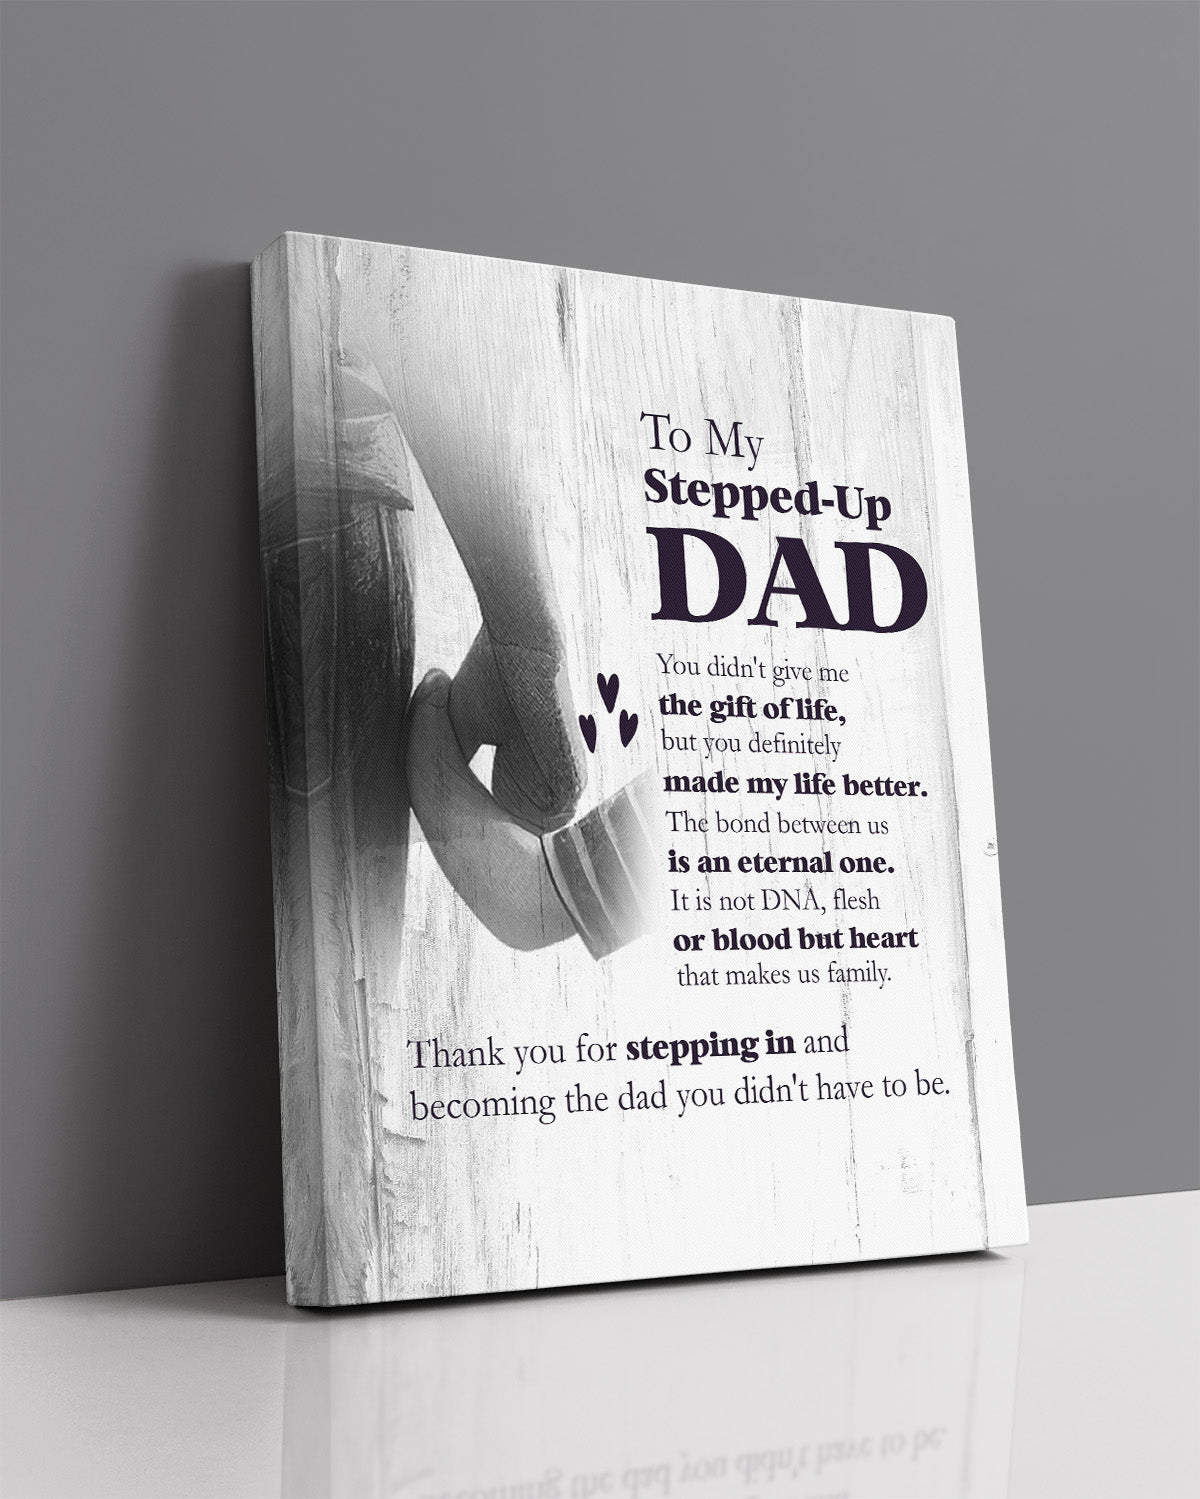 To My Stepped-Up Dad - You Didn't Give Me The Gift Of Life But You Definitely Made My Life Better - Stepdad Gifts